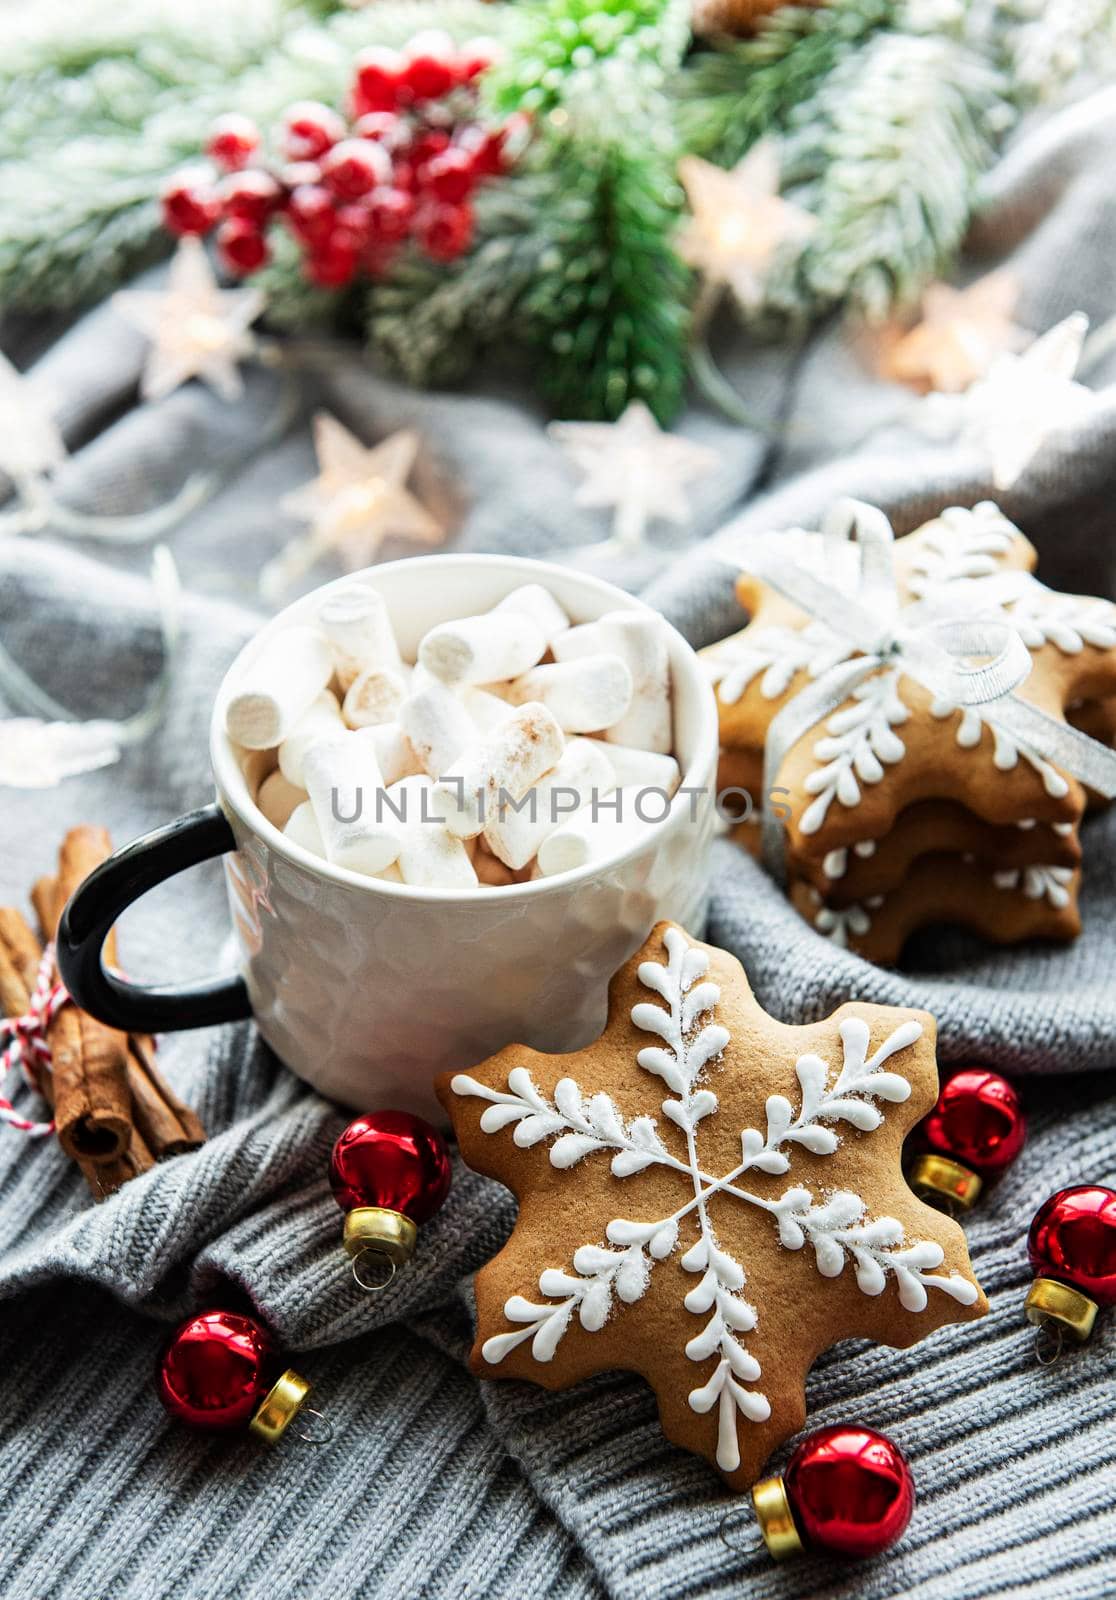 Christmas decorations, cocoa and gingerbread cookies. by Almaje